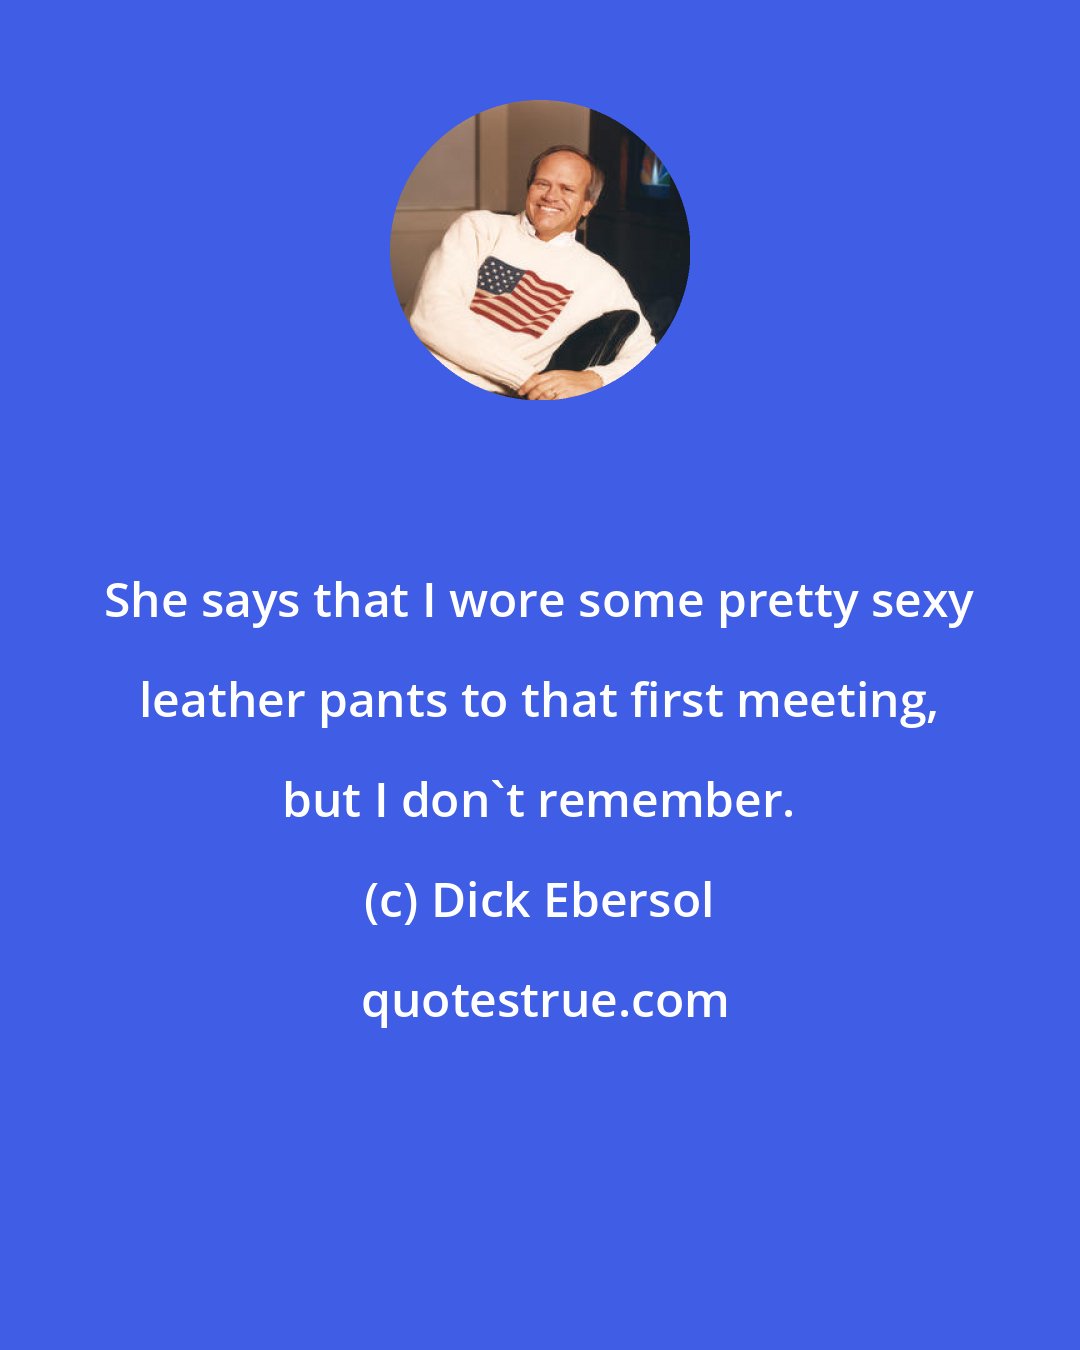 Dick Ebersol: She says that I wore some pretty sexy leather pants to that first meeting, but I don't remember.